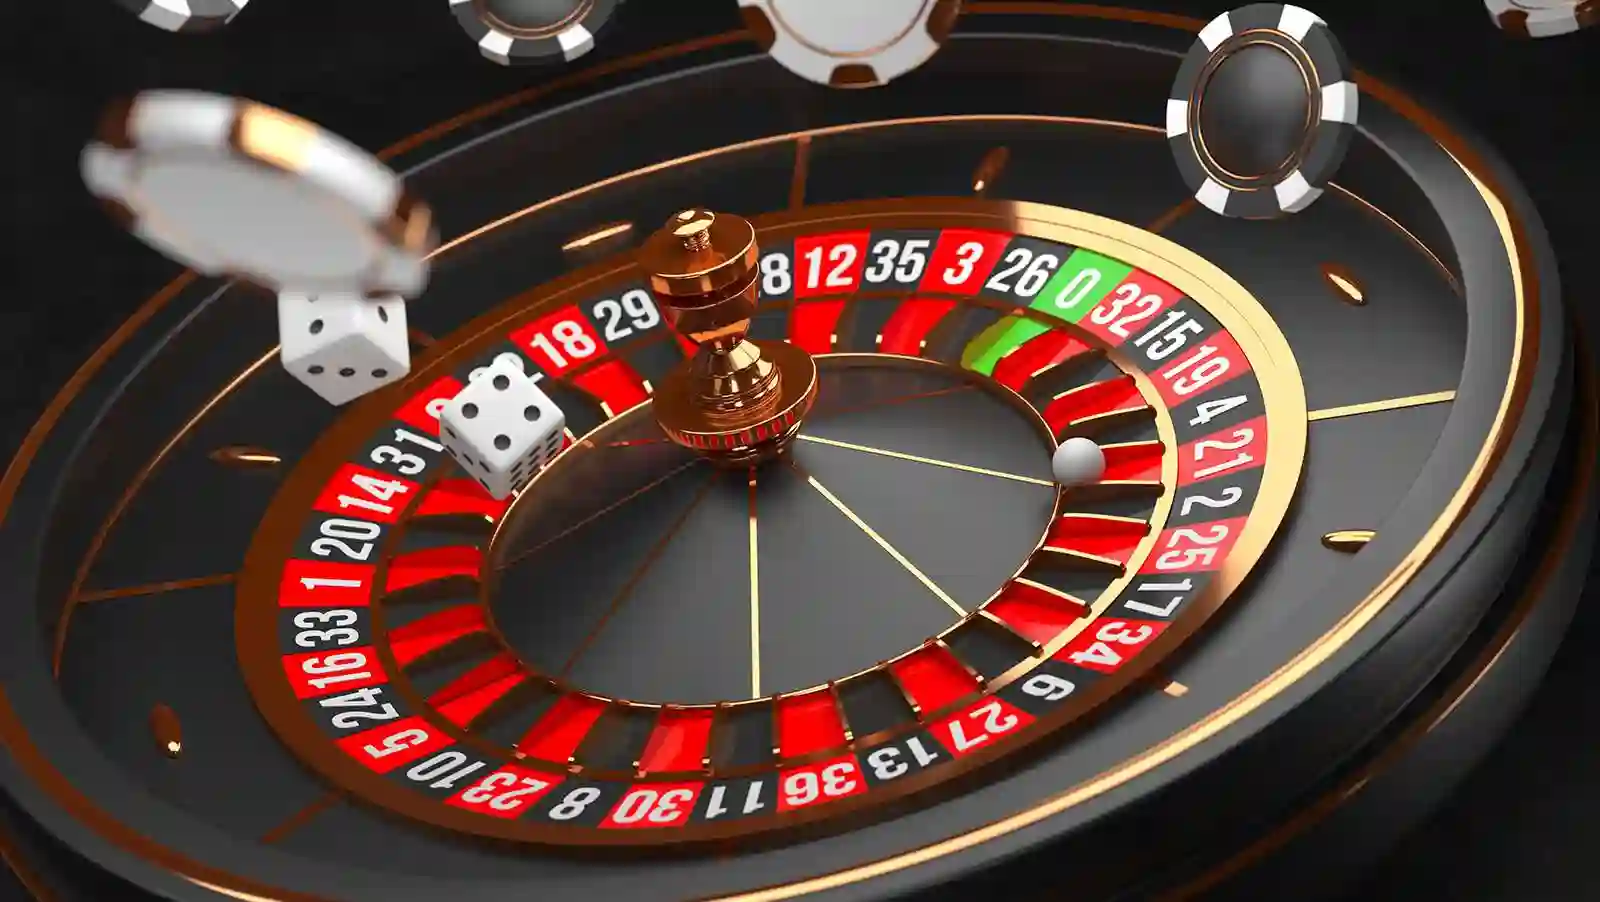 Baccarat Sites Offer a Wide Range of Games and Can Be Used to Make Money Online